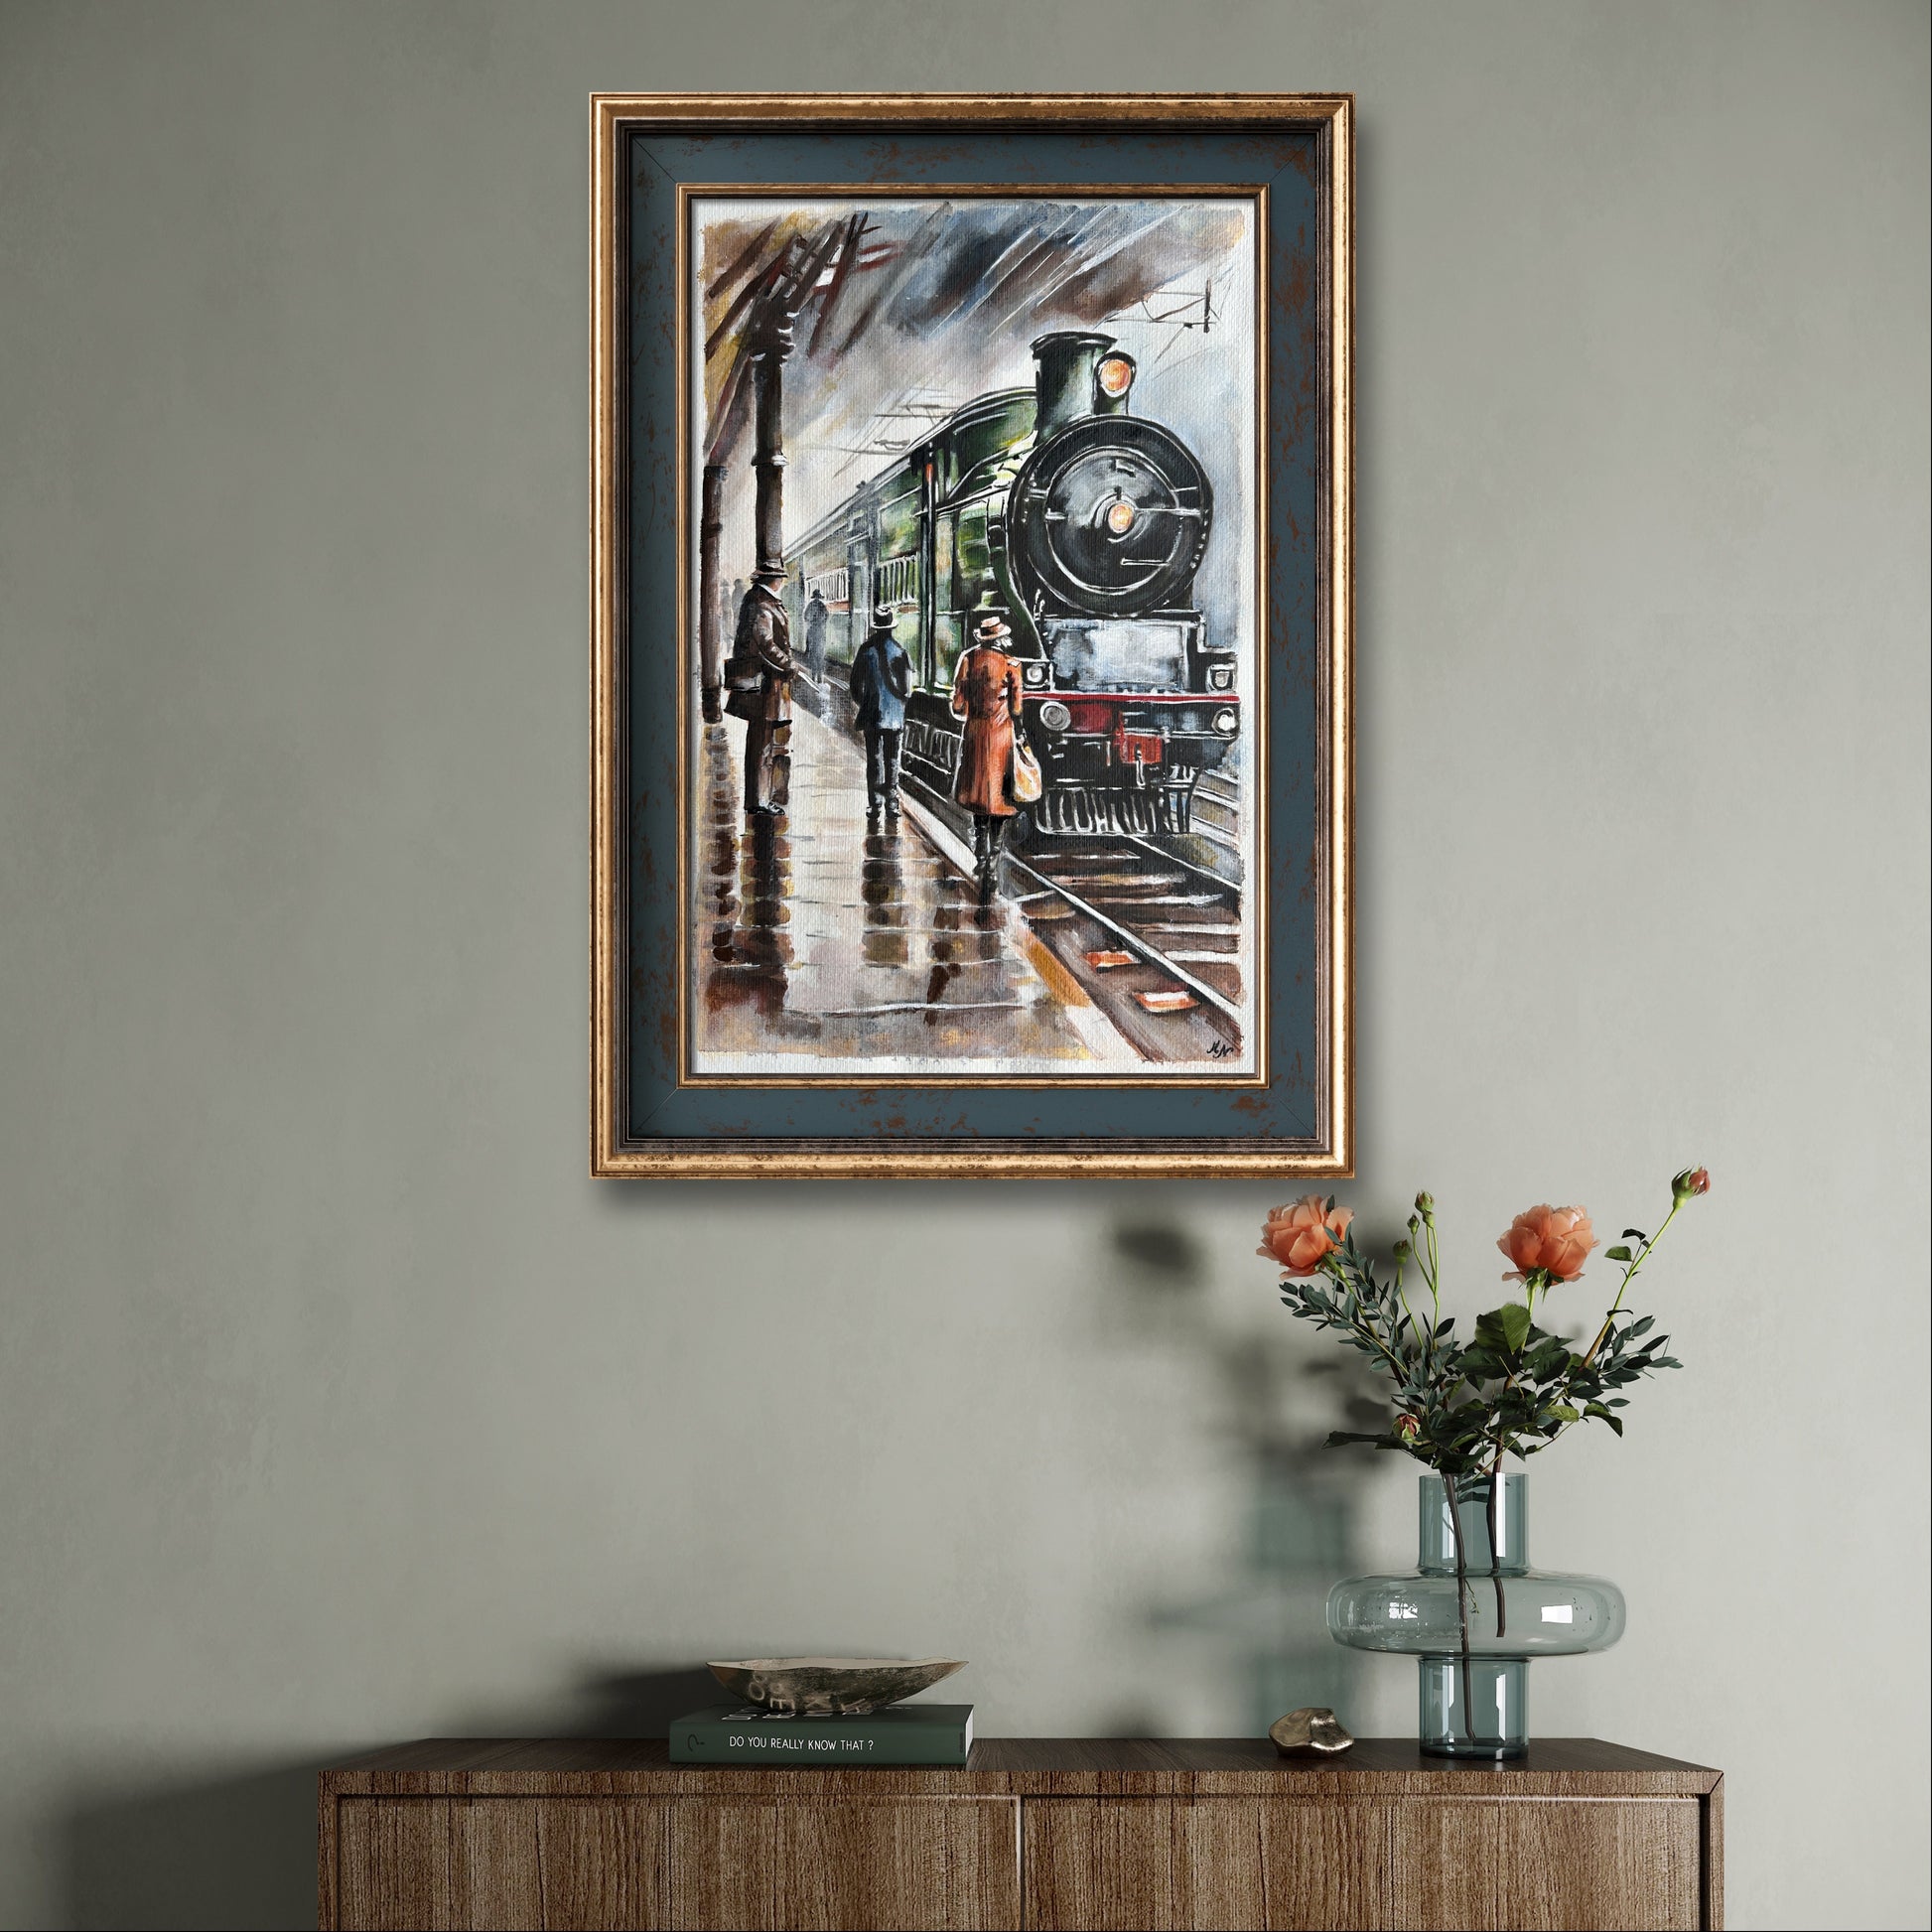 "Age of Steam" invites viewers to ponder the passage of time and the enduring beauty of everyday moments.